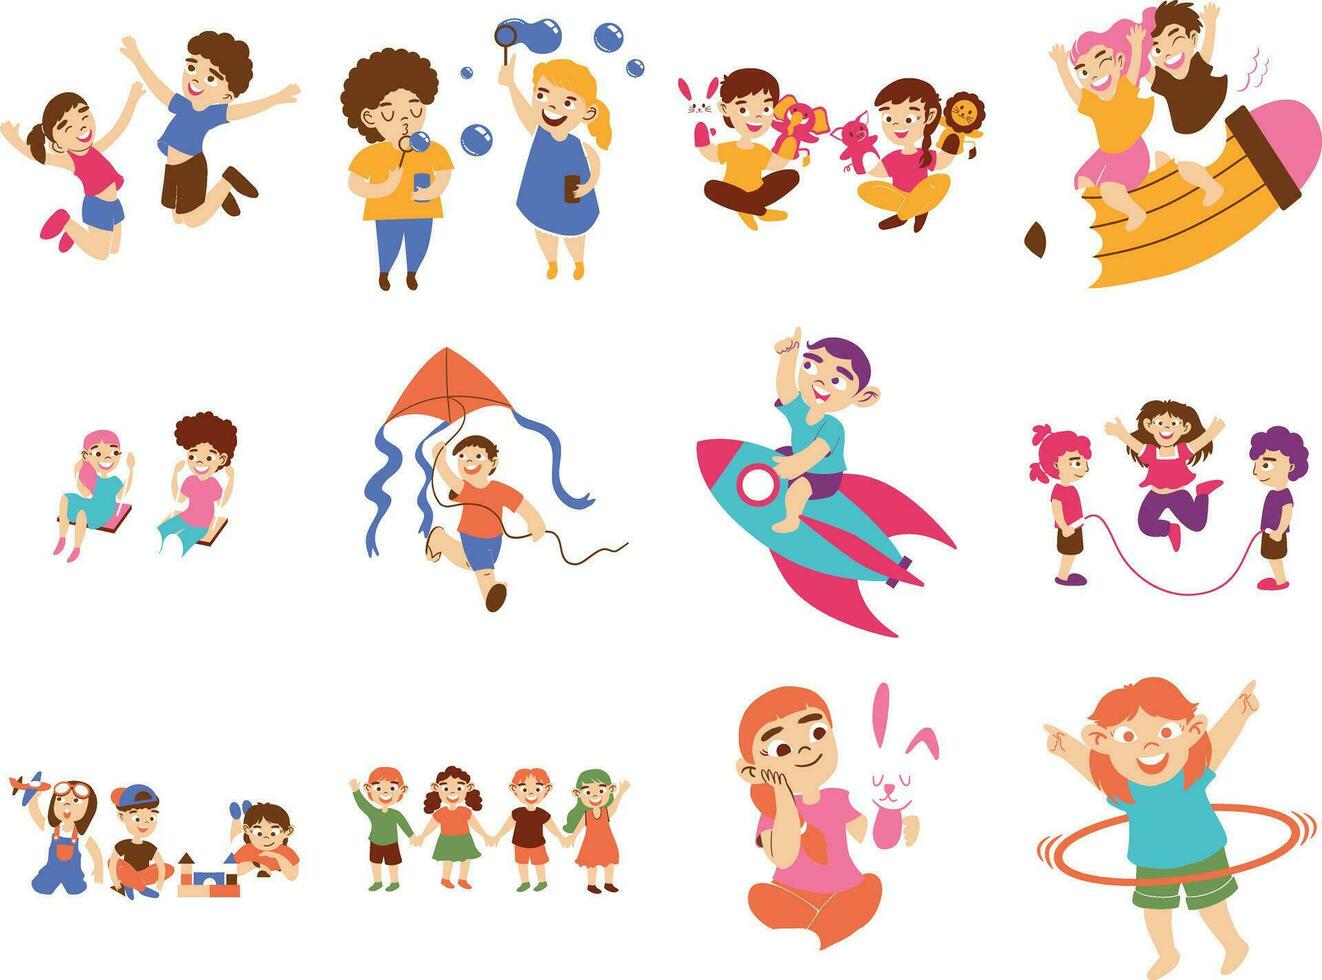 Fun and Colorful Children's Day Character Illustration Set vector